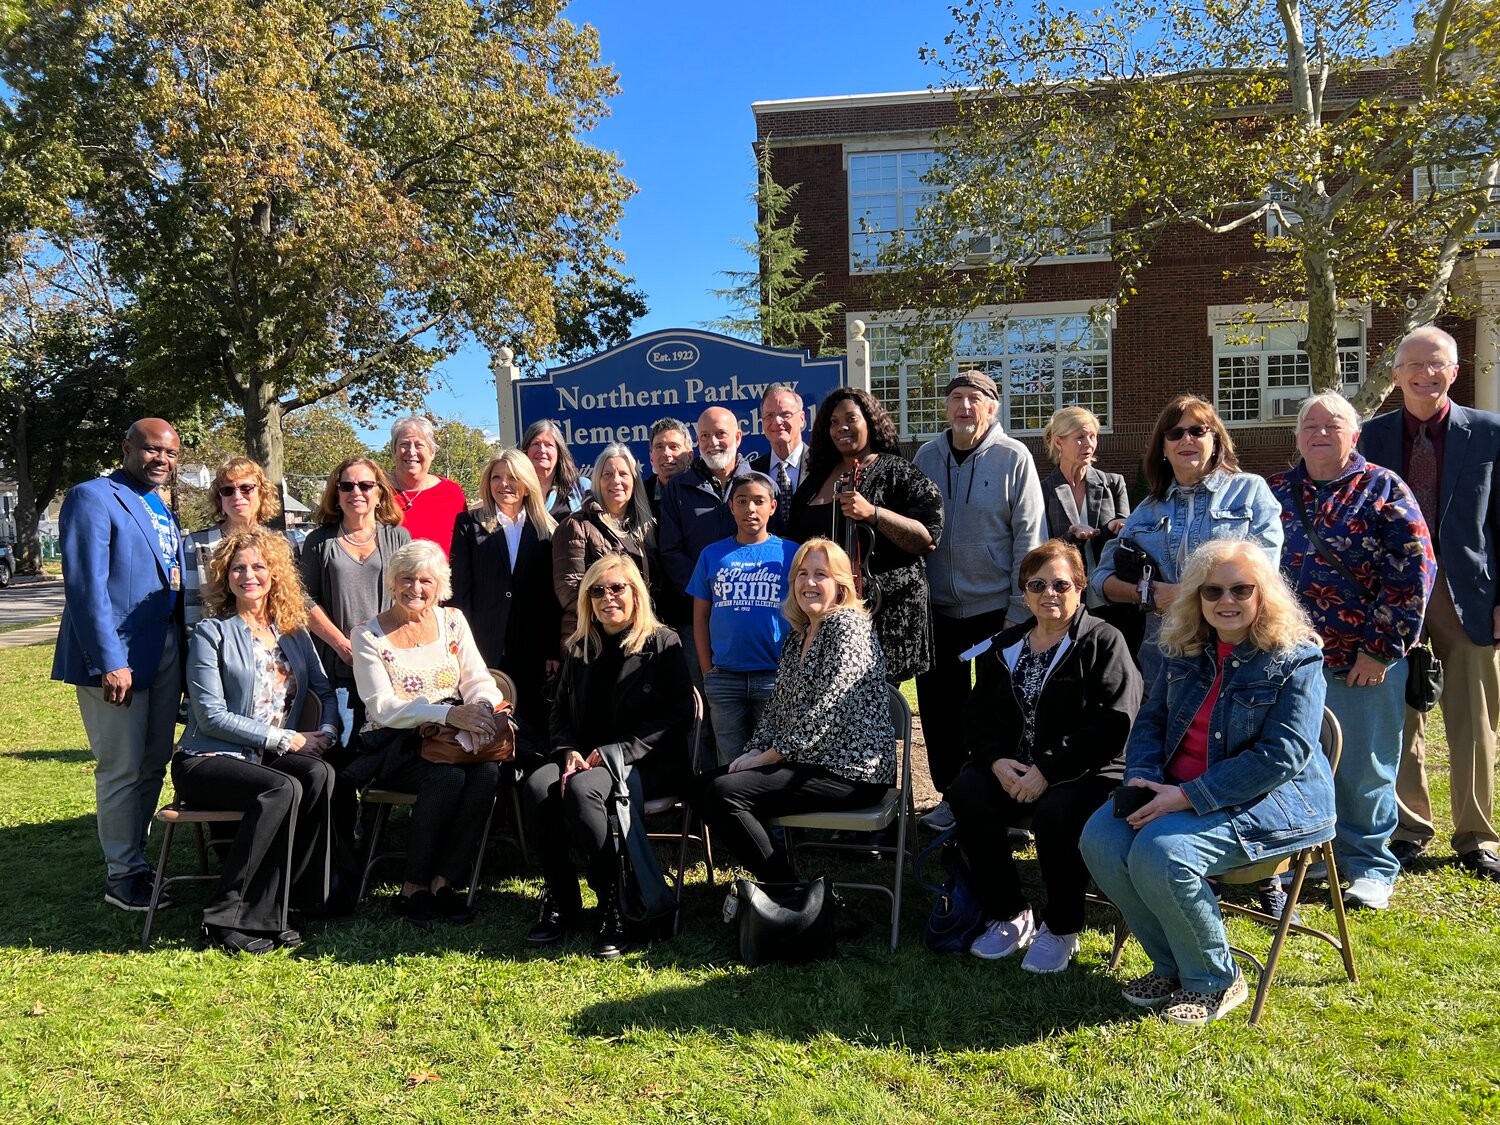 A crowd of enthusiastic Northern Parkway School alumni converged on the school lawn with Principal Bilal Polson for the school’s 100th anniversary.